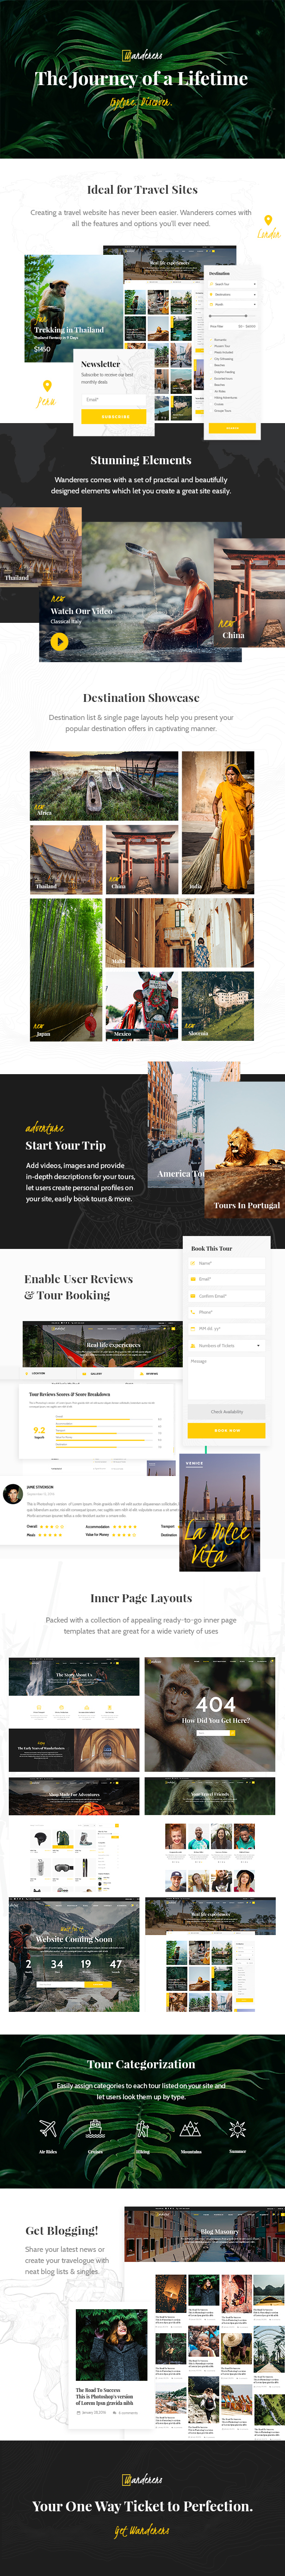 WordPress theme Wanderers - An Adventurous Theme for Travel and Tourism (Travel)